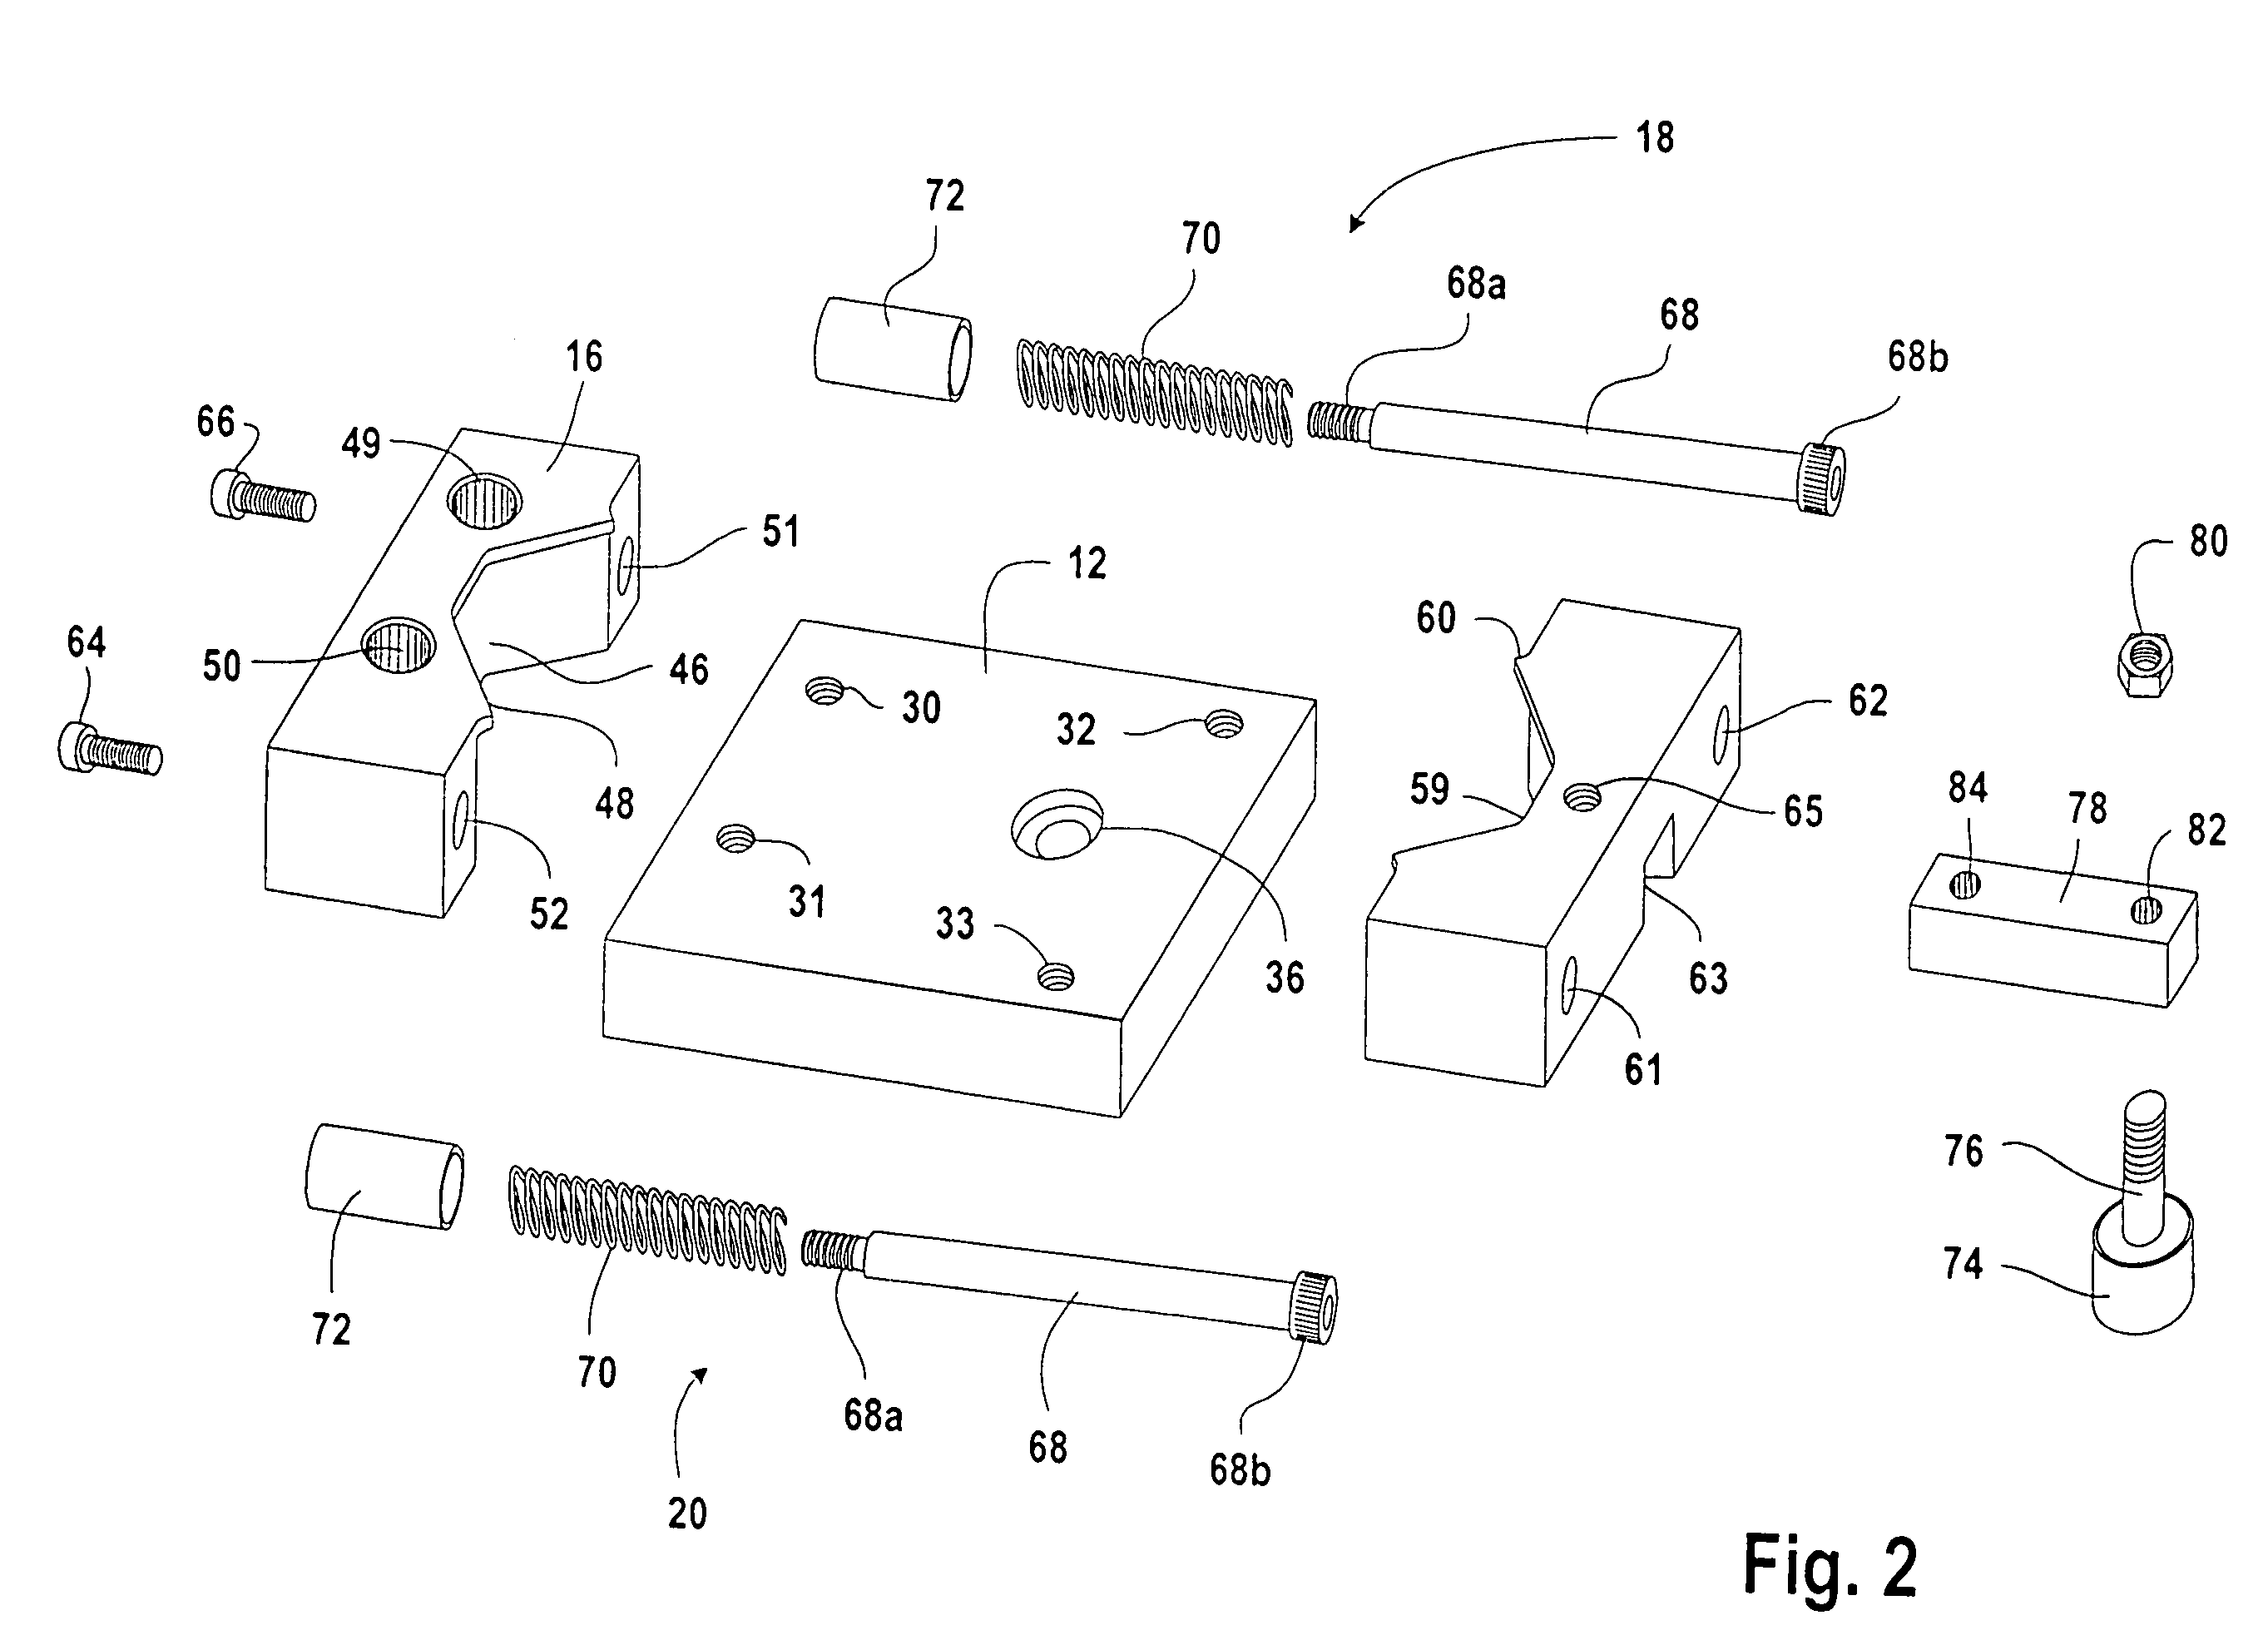 Device for holding objects to be treated